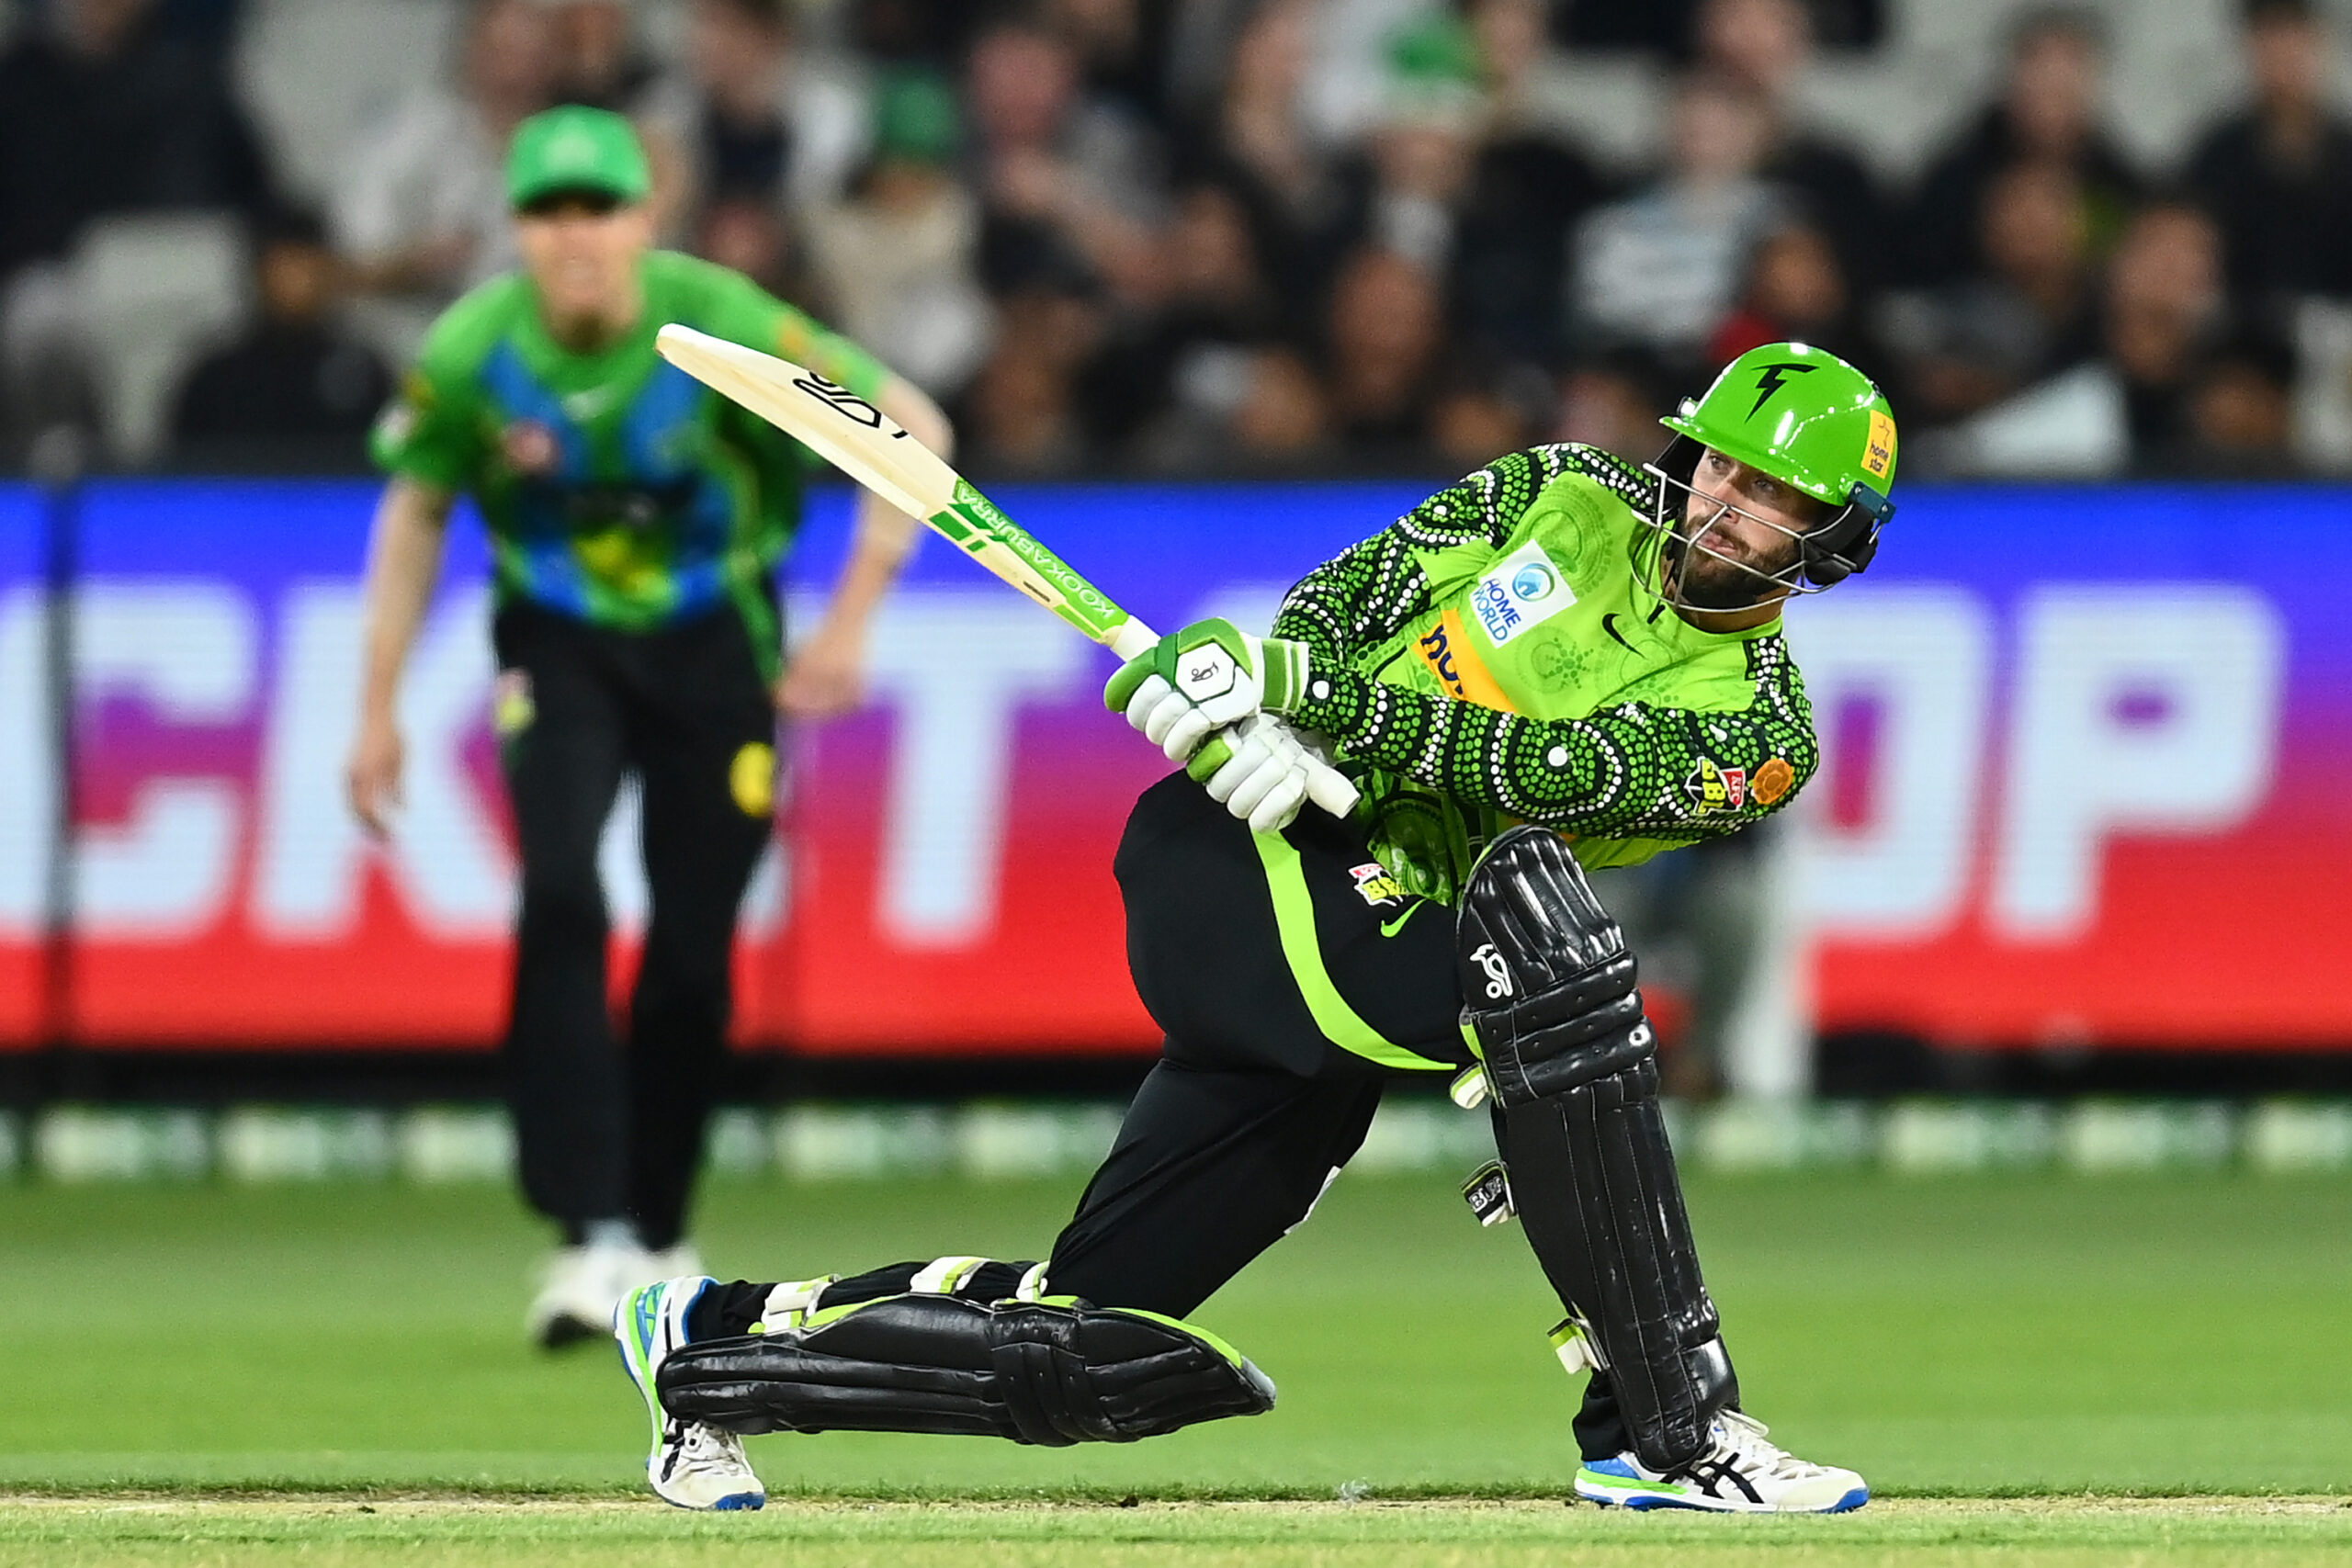 BBL live stream How to watch the Big Bash League on TV or online, full BBL12 broadcast guide